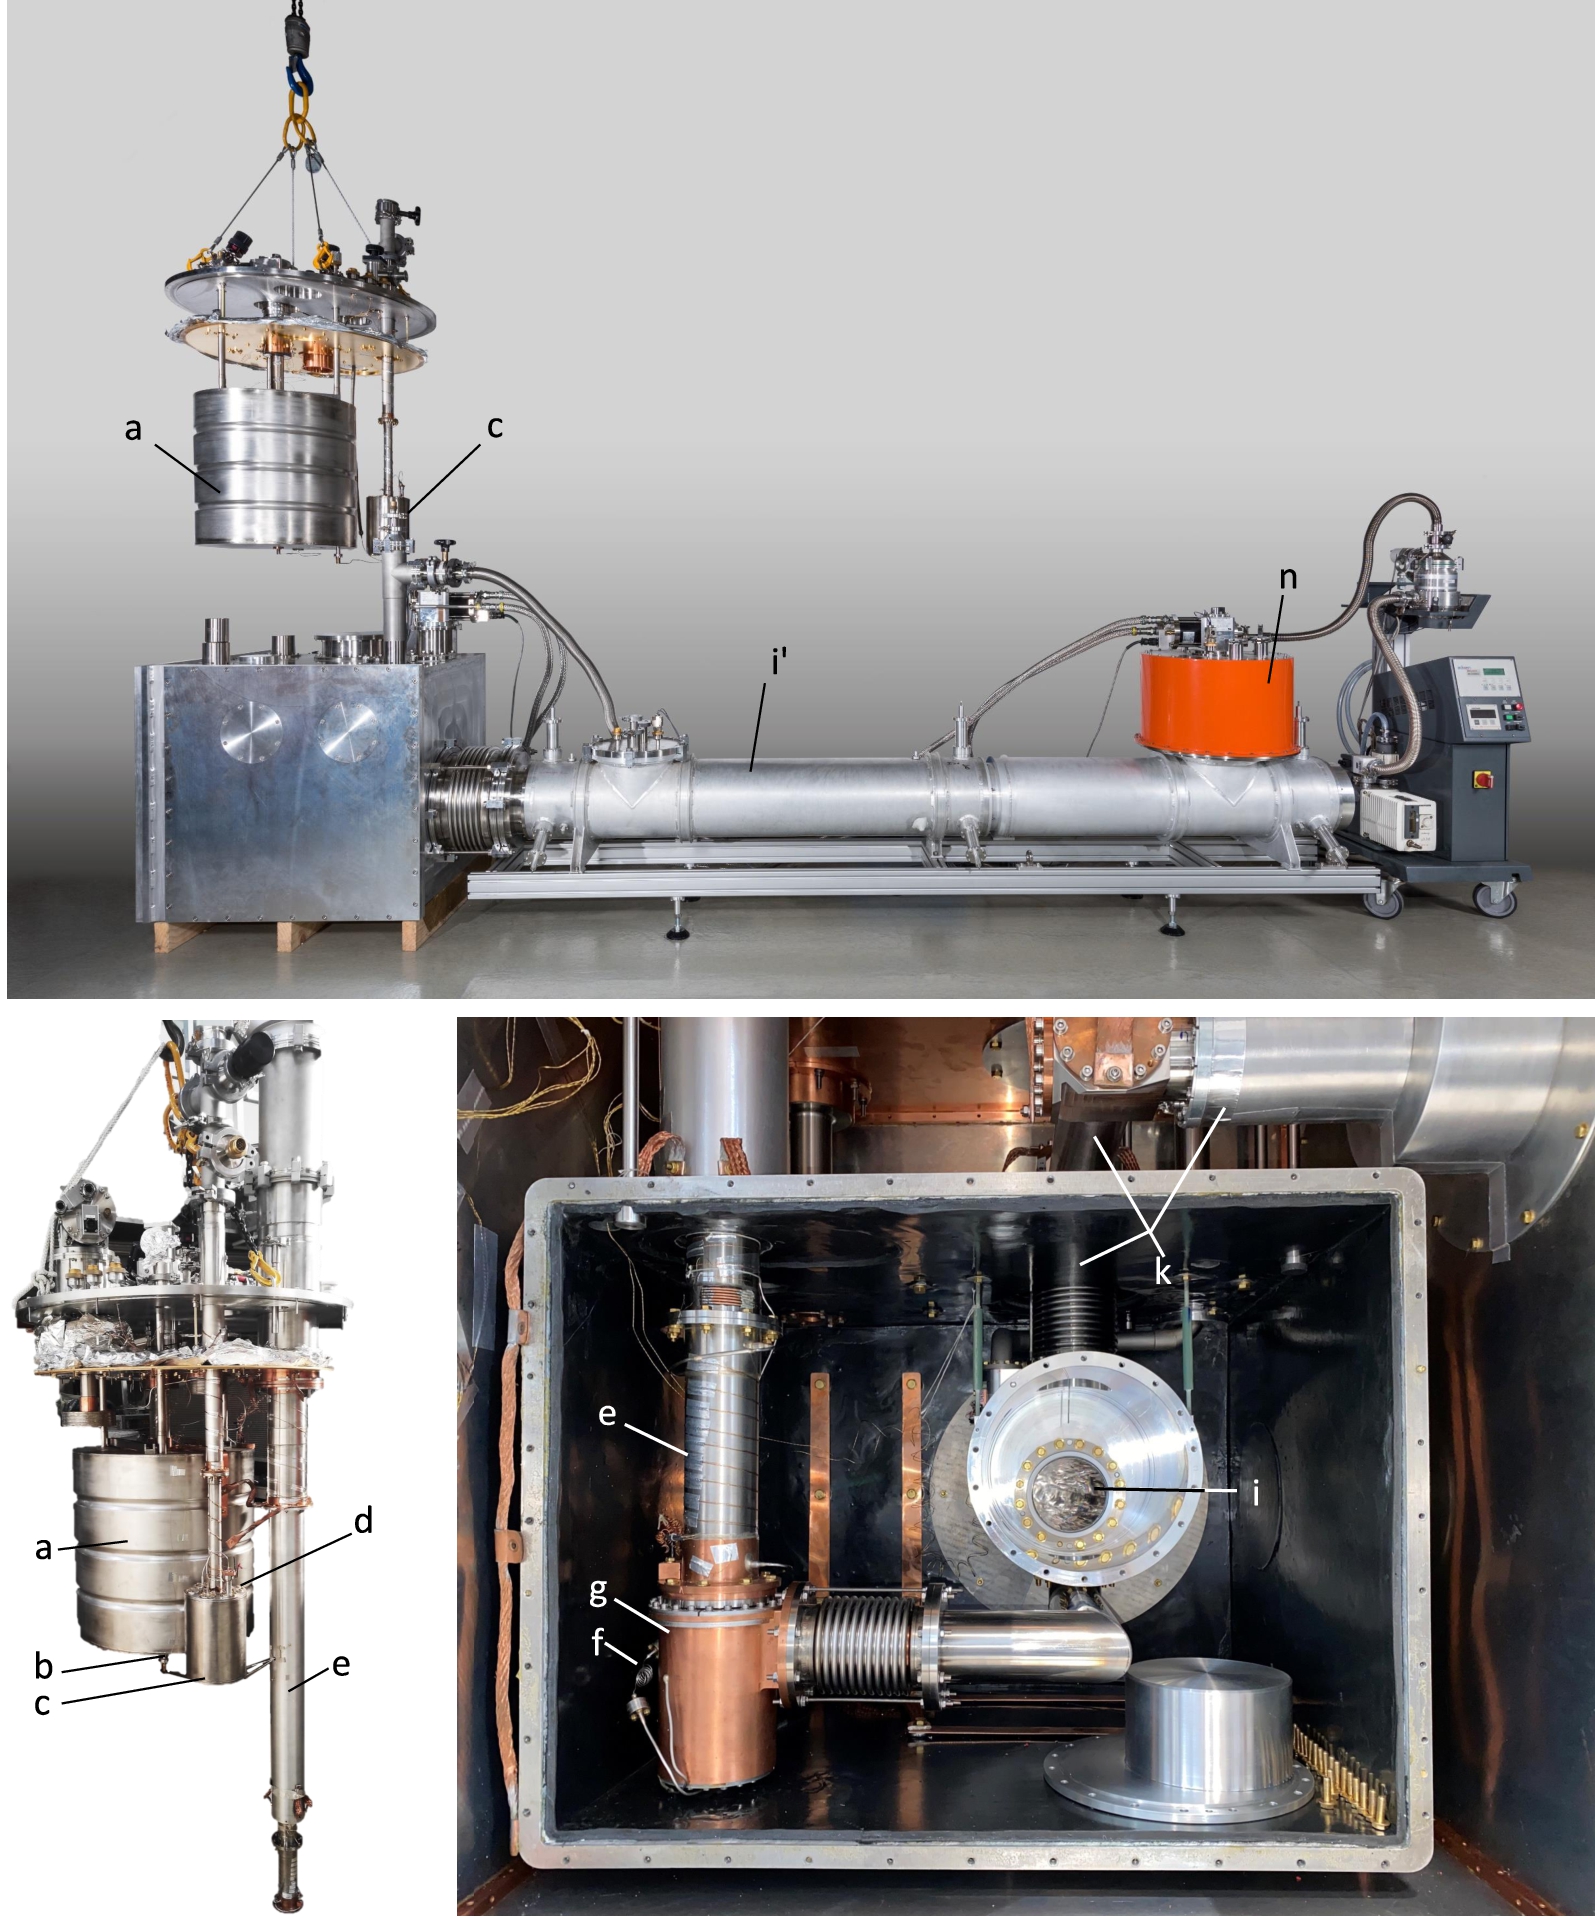 Pictures of SuperSUN with the same labeling as in Fig. 1: (a) the 100 L liquid helium bath, (b) the needle valve, (c) the 1-K pot, (d) the superleak, (e) the 3He pumping column, (f) the 3He impedance, (g) the 3He/4He heat exchanger, (i) the superfluid conversion volume, (i’) vacuum vessel containing the thermally screened conversion volume, (k) the UCN extraction system, (n) the 4-K cryostat. Credit top photo: Ecliptique – Laurent Thion.